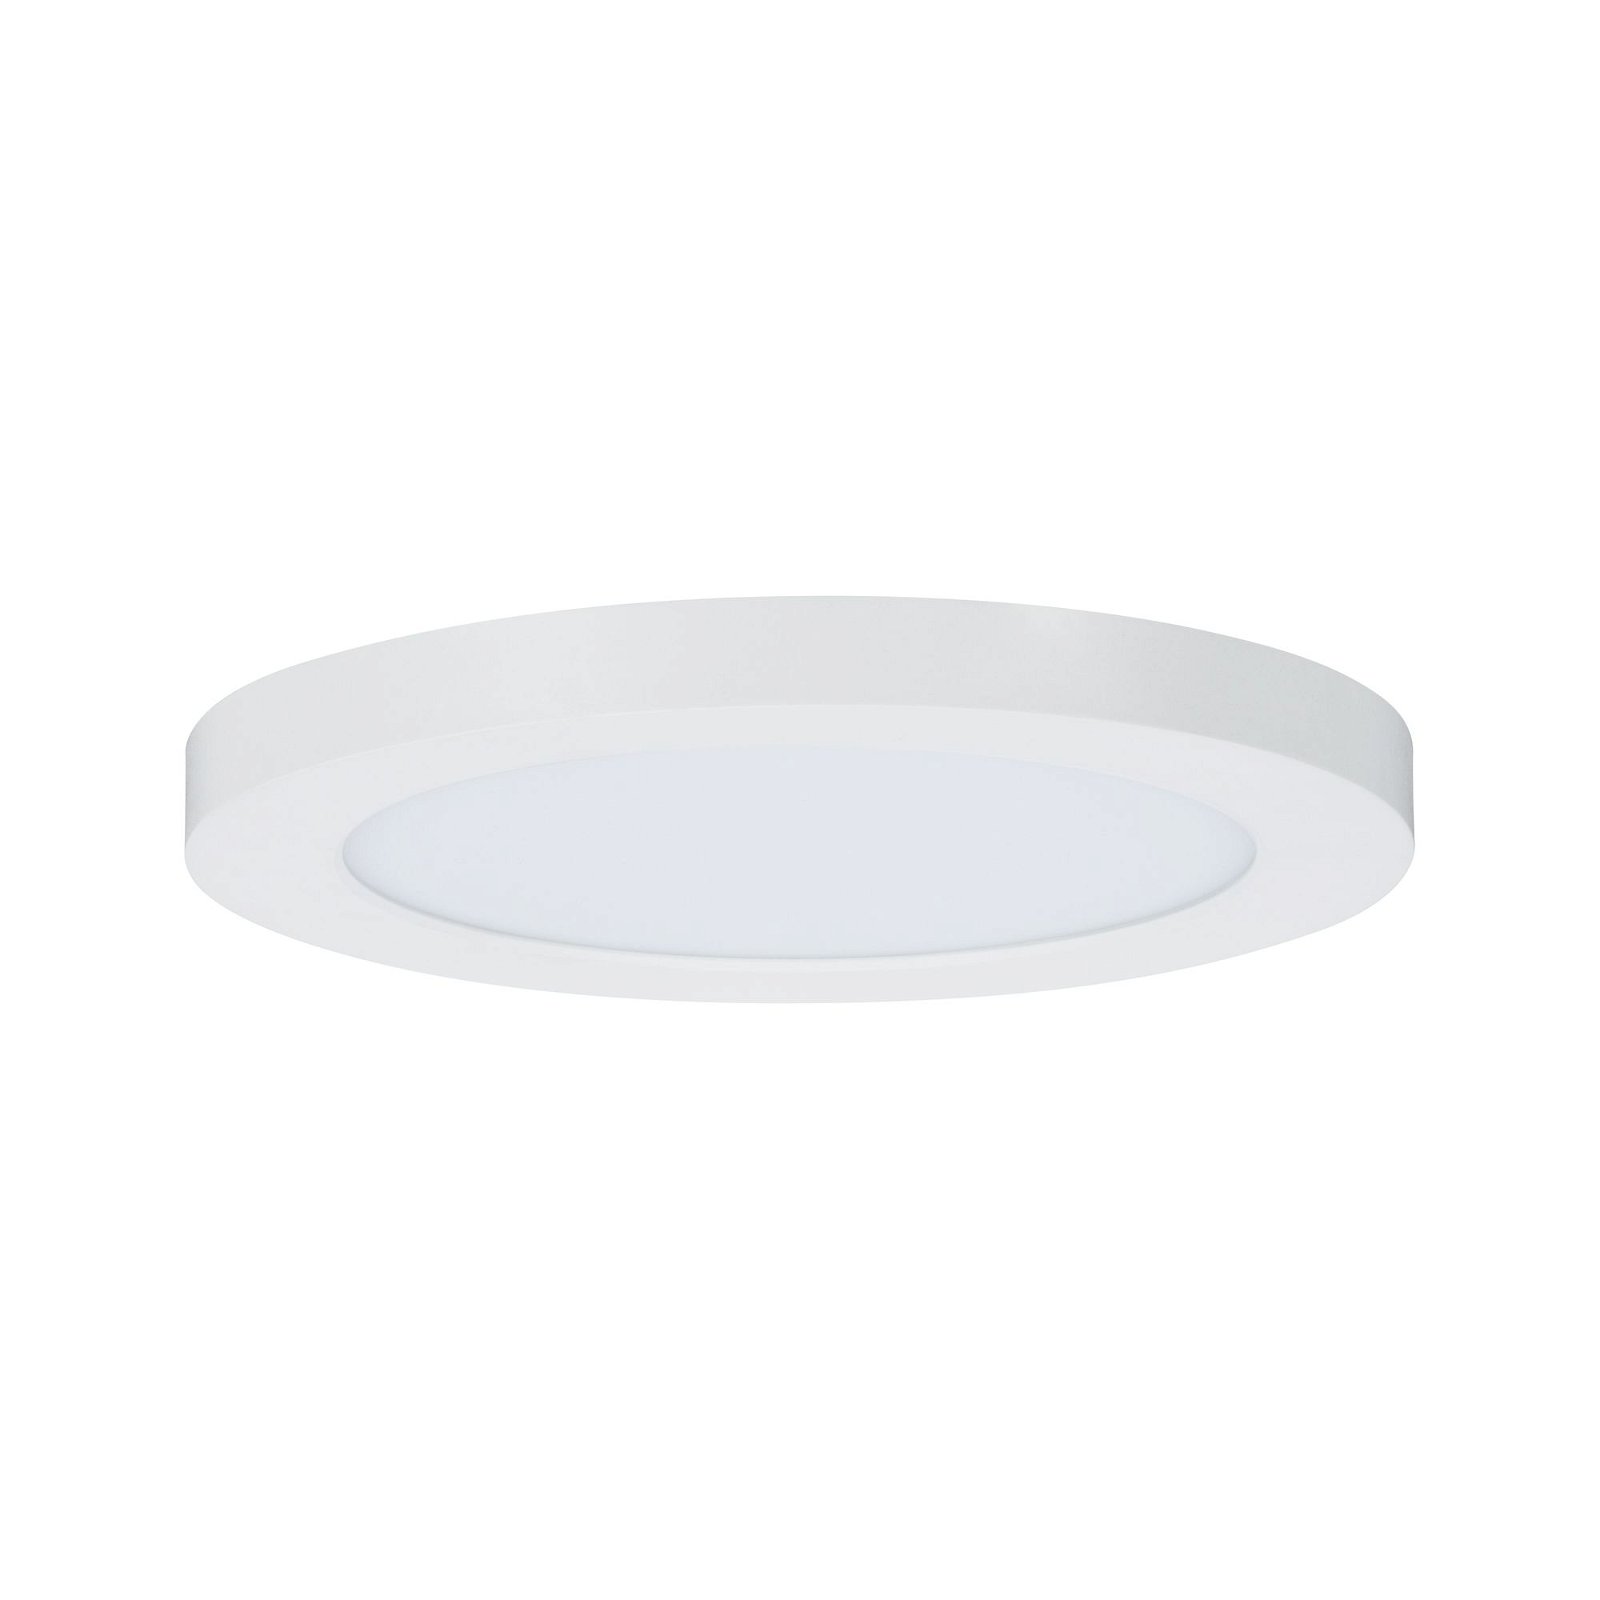 LED-inbouwpaneel Cover-it Promo rond 165mm 3000K Wit mat